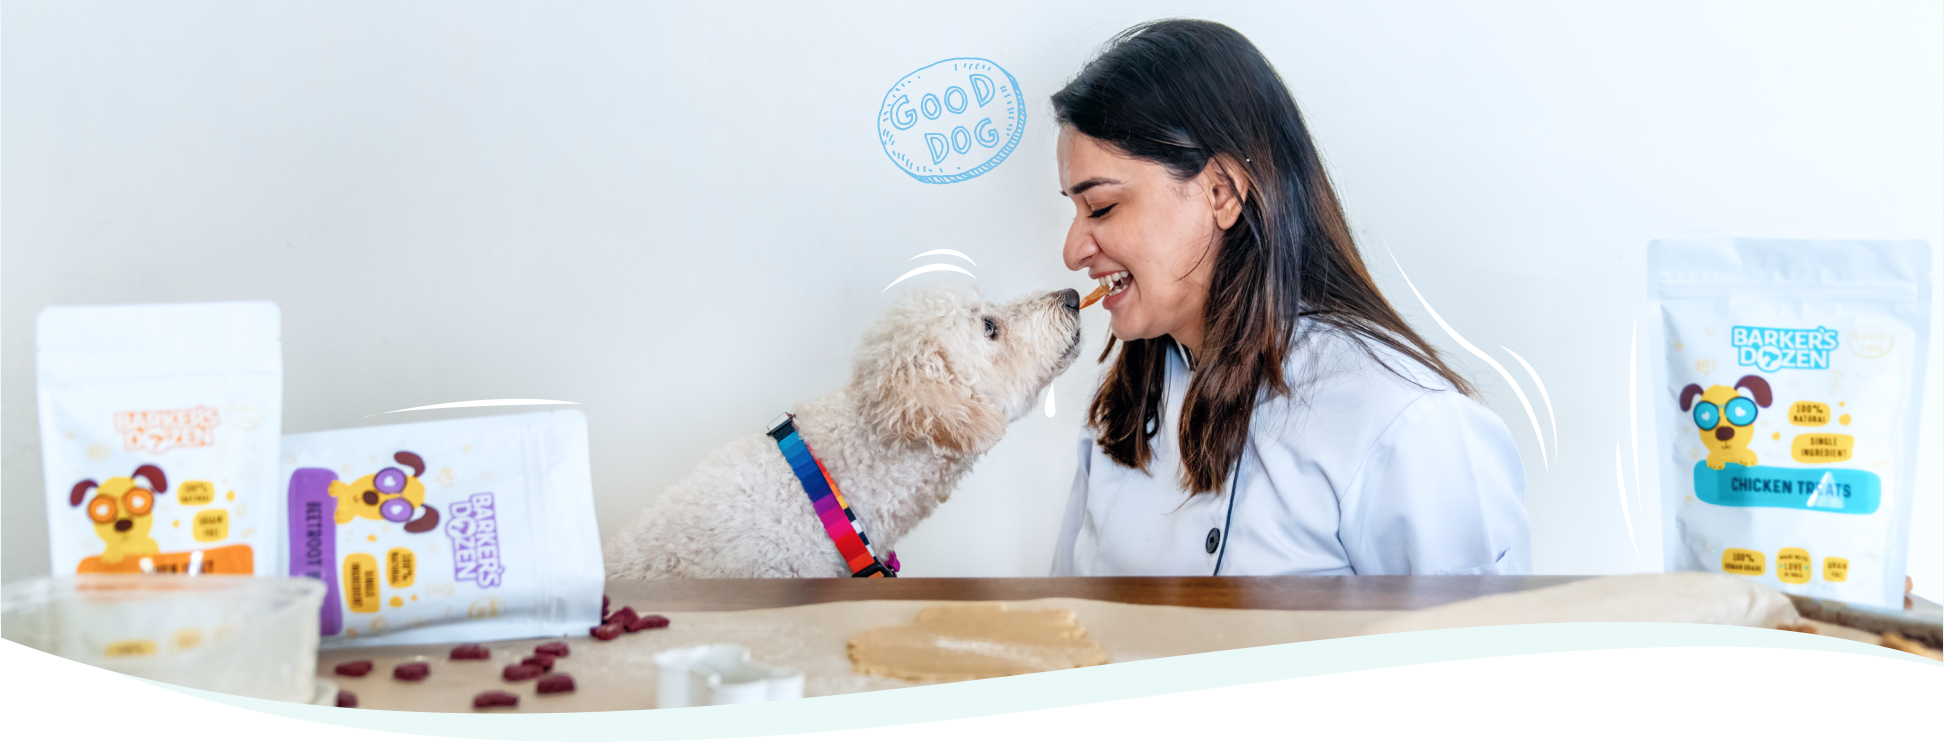 Premium Dog –Treats –cakes -food made with human-grade, preservative Free ingredients. Know our story at Barker’s Dozen